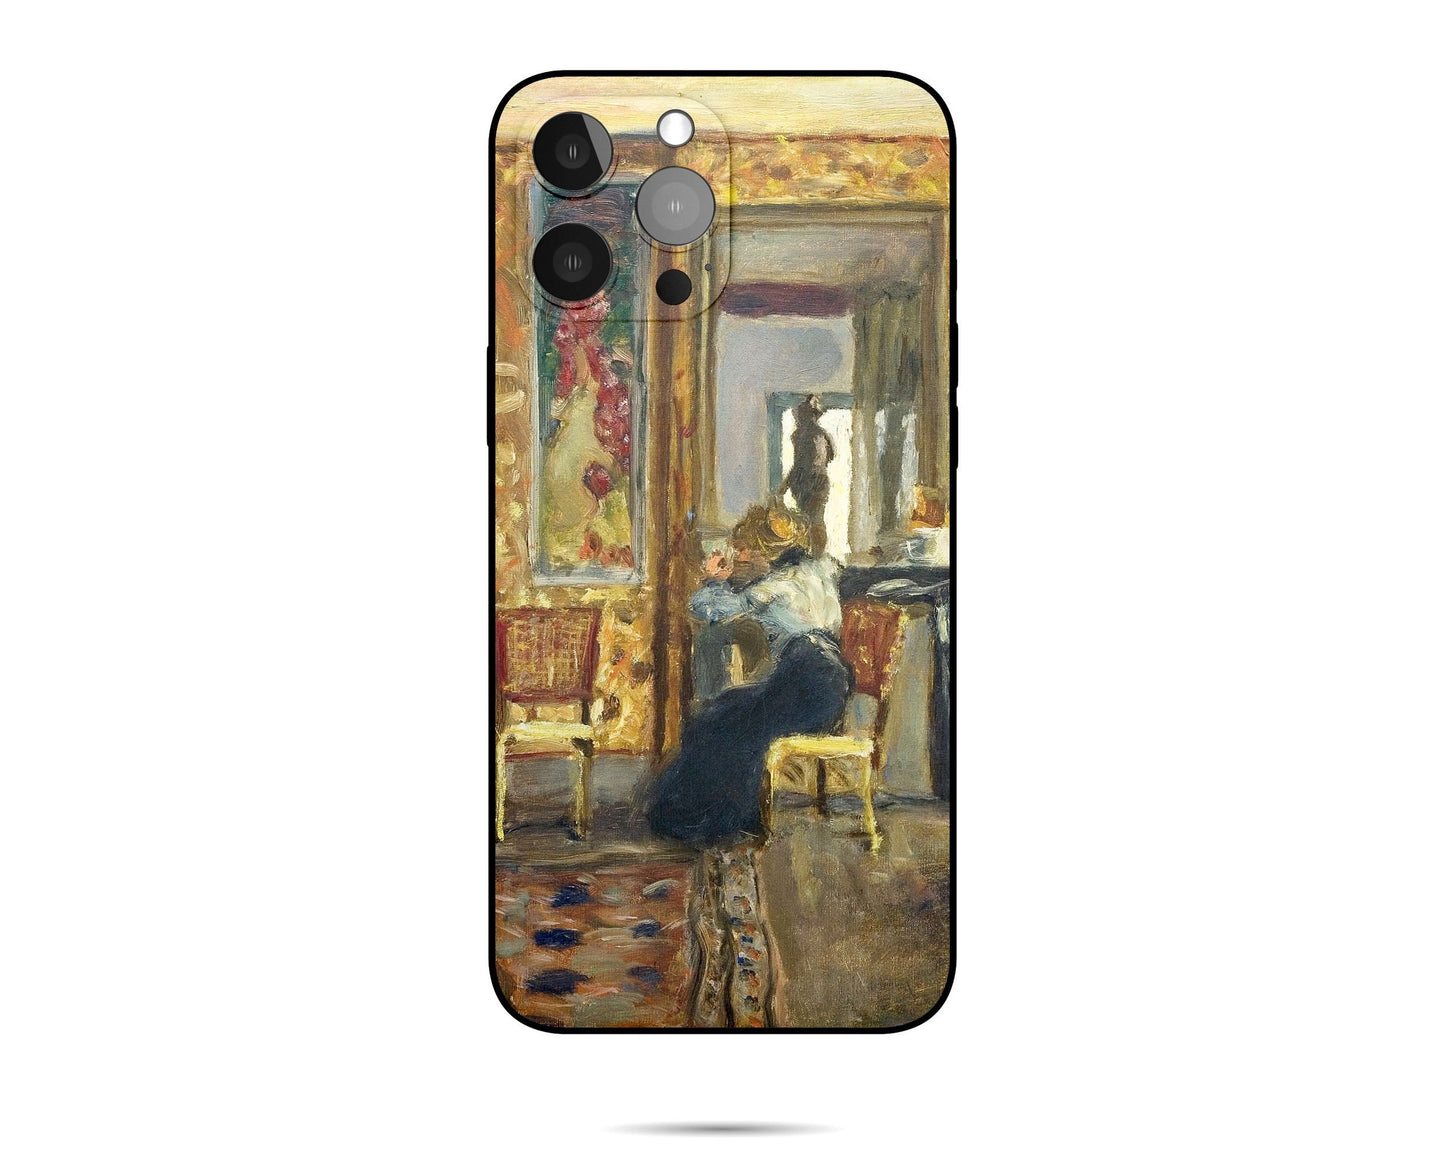 Iphone 14 Pro Case Of Pierre Bonnard Famous Painting, Iphone 12 Mini Case, Iphone Xs Max Case, Designer Iphone 8 Plus Case, Gift For Her